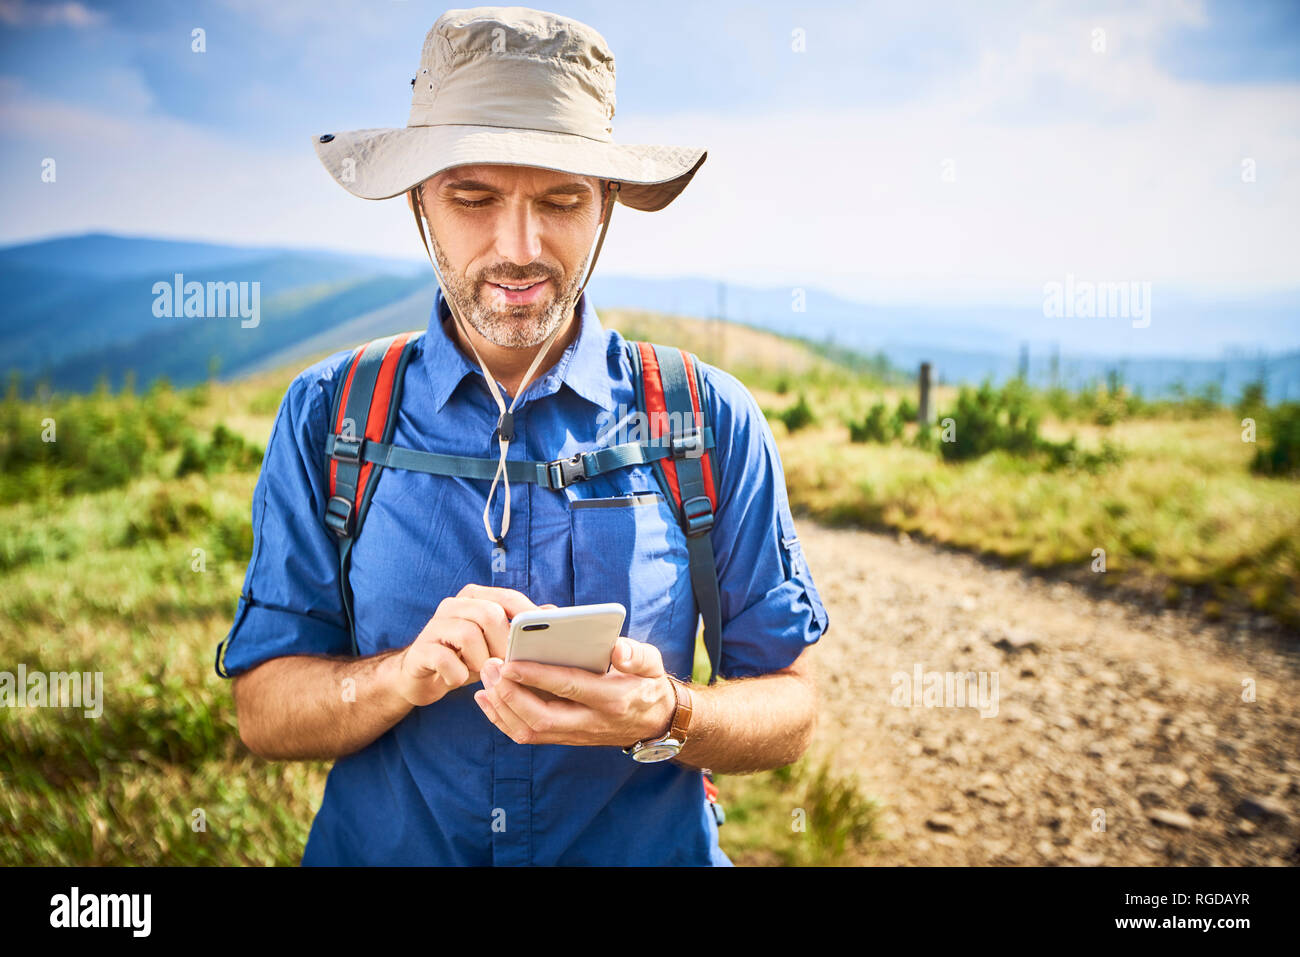 Man checking his cell phone during hiking trip Stock Photo